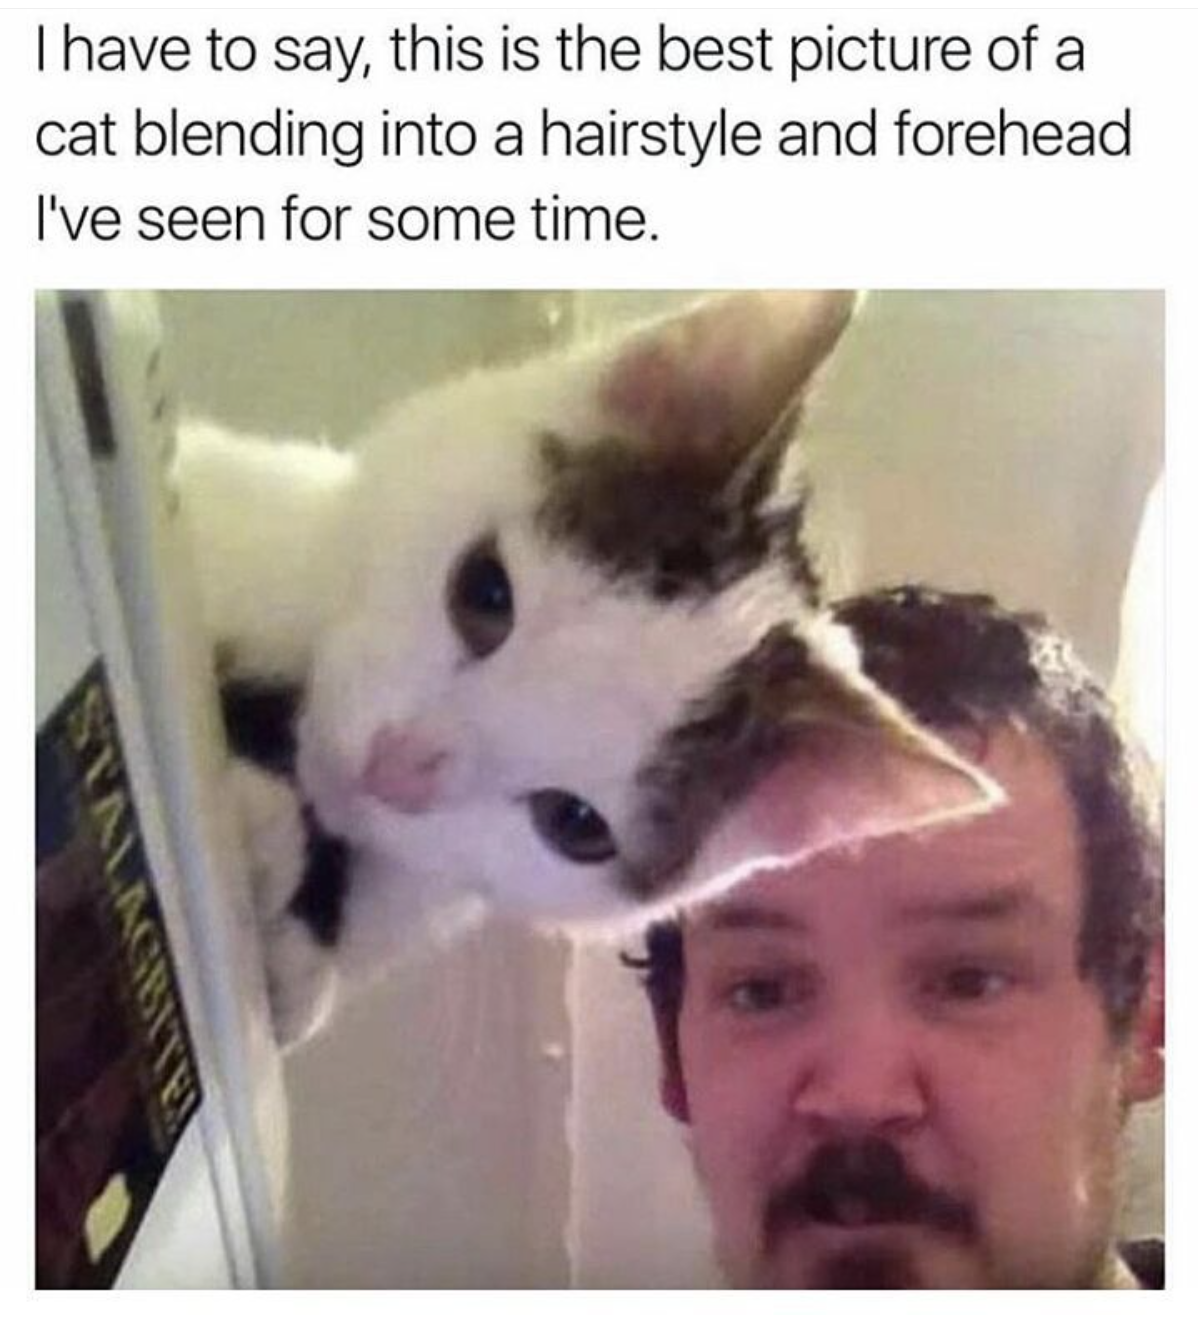 memes - lovecraft memes - I have to say, this is the best picture of a cat blending into a hairstyle and forehead I've seen for some time.